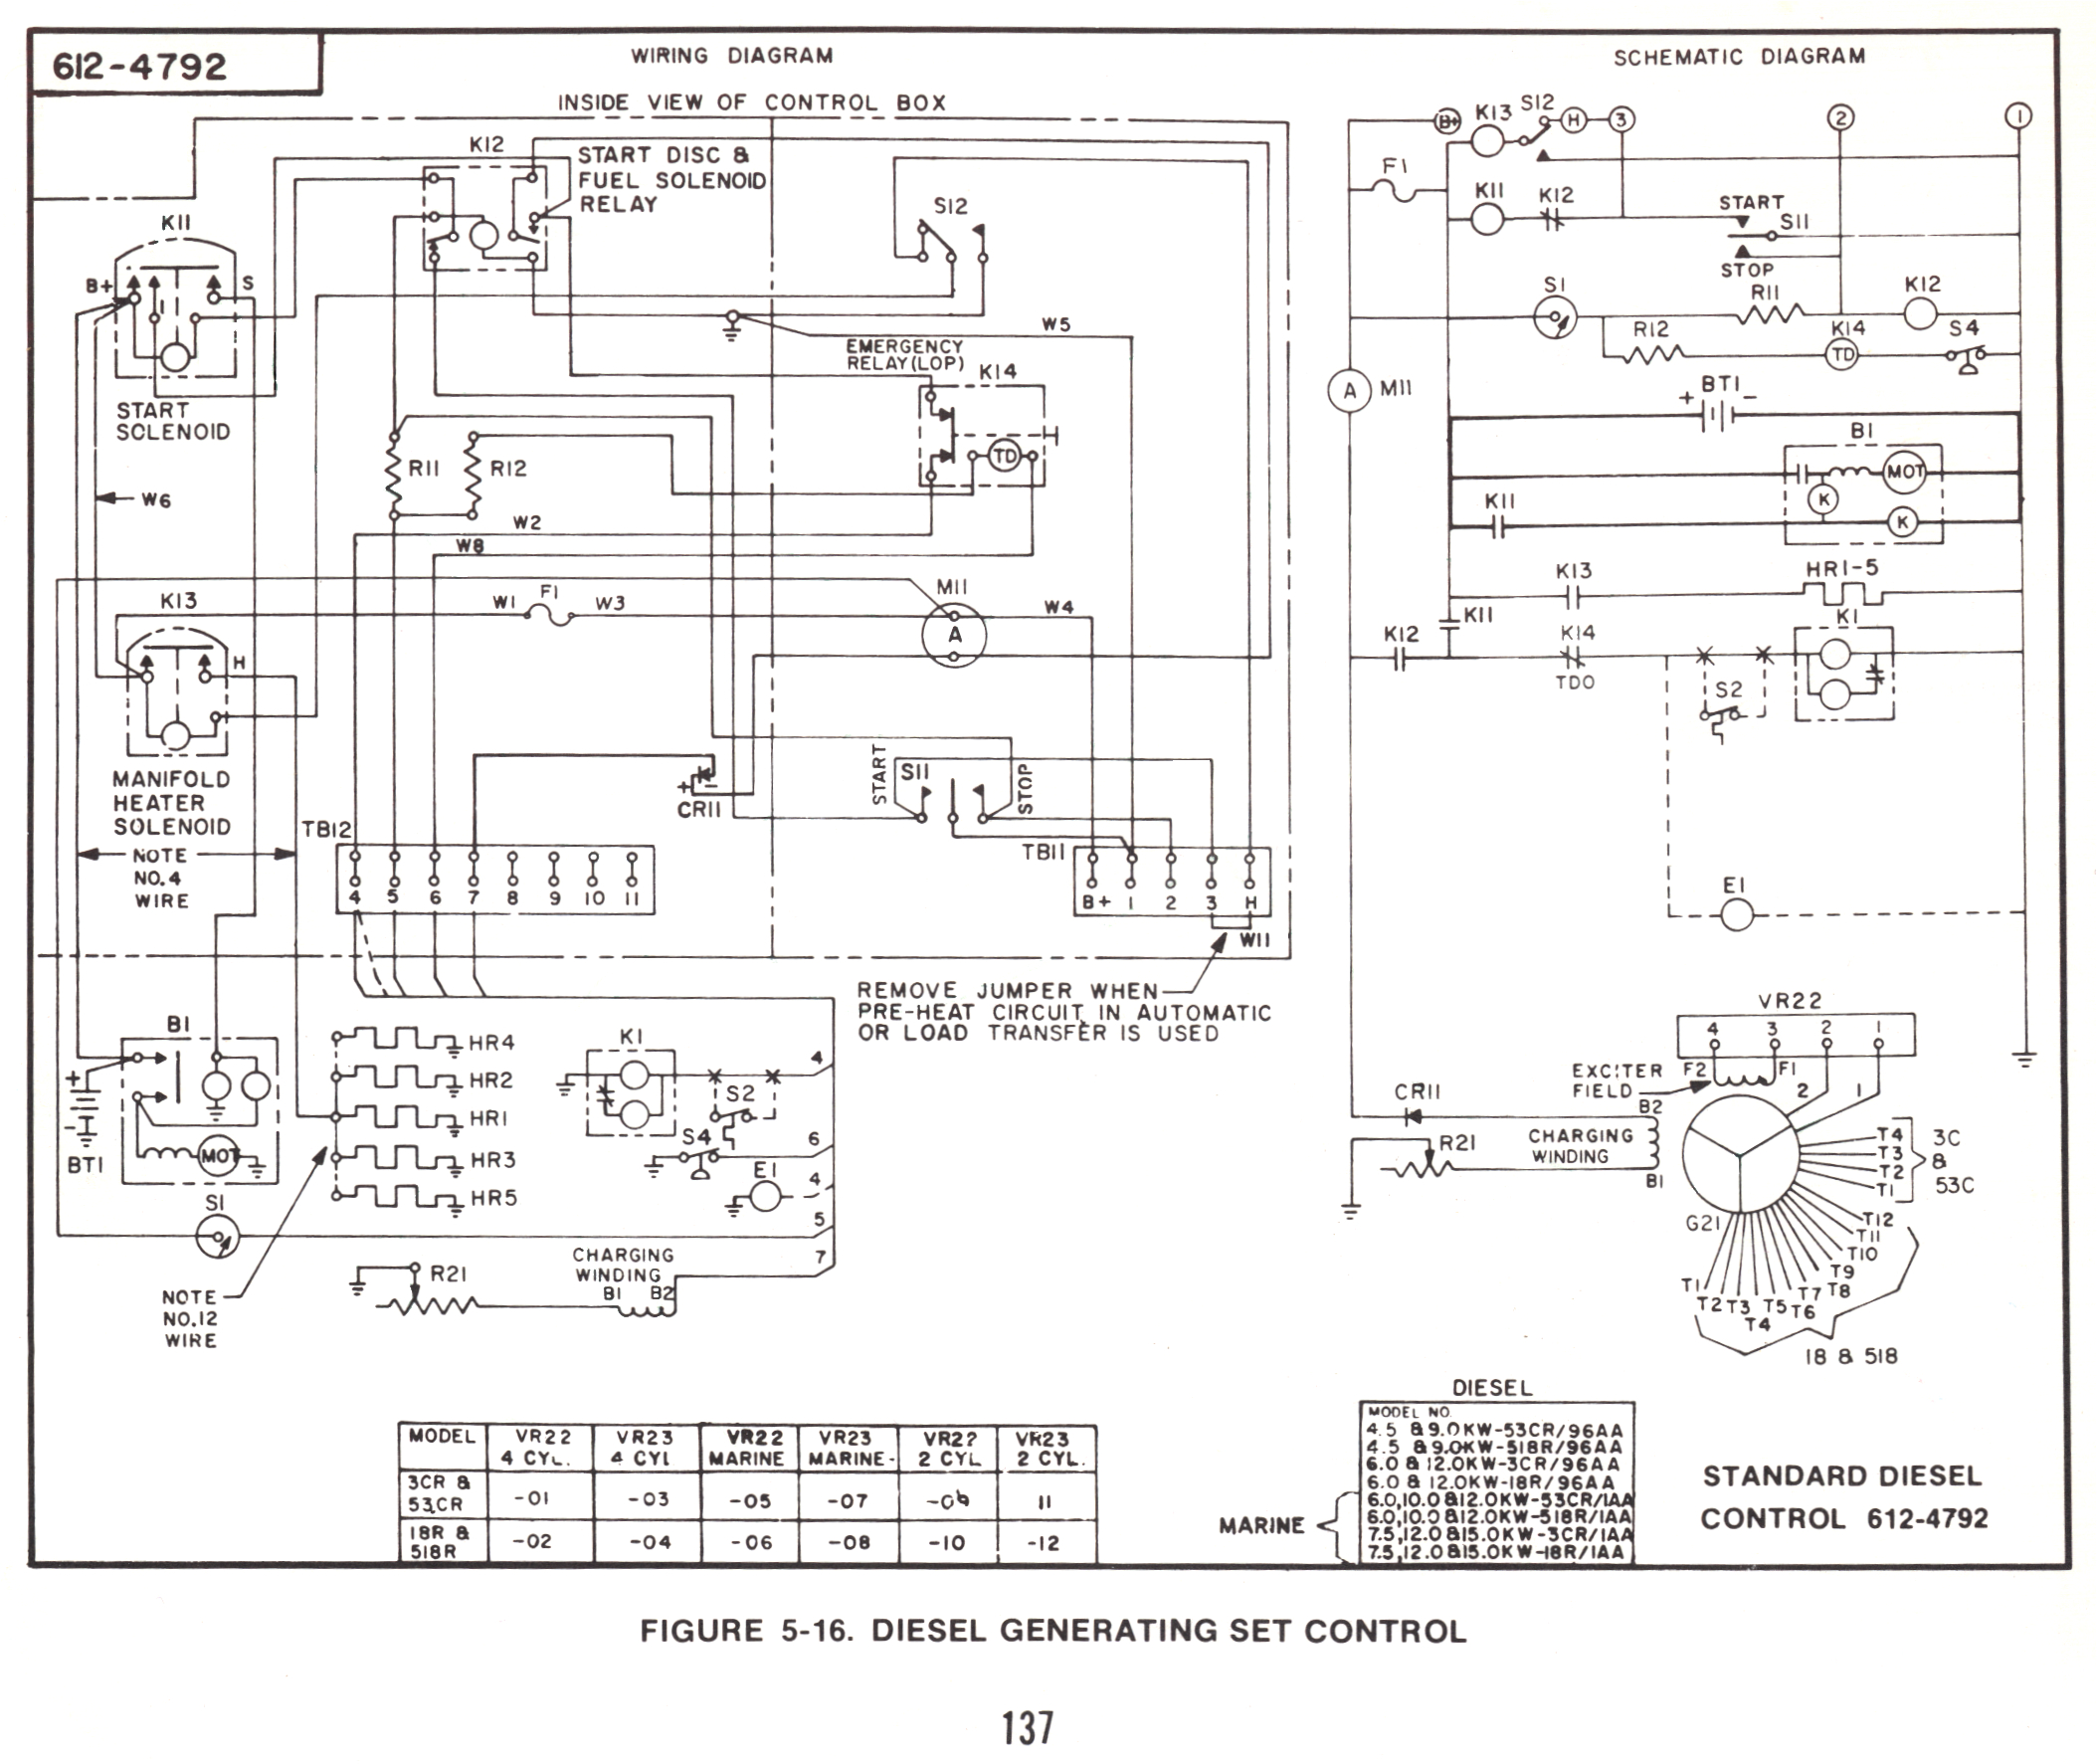 wiring diagram standby generator unique wiring diagram 10 free generator transfer switch 15 xcdpecoral